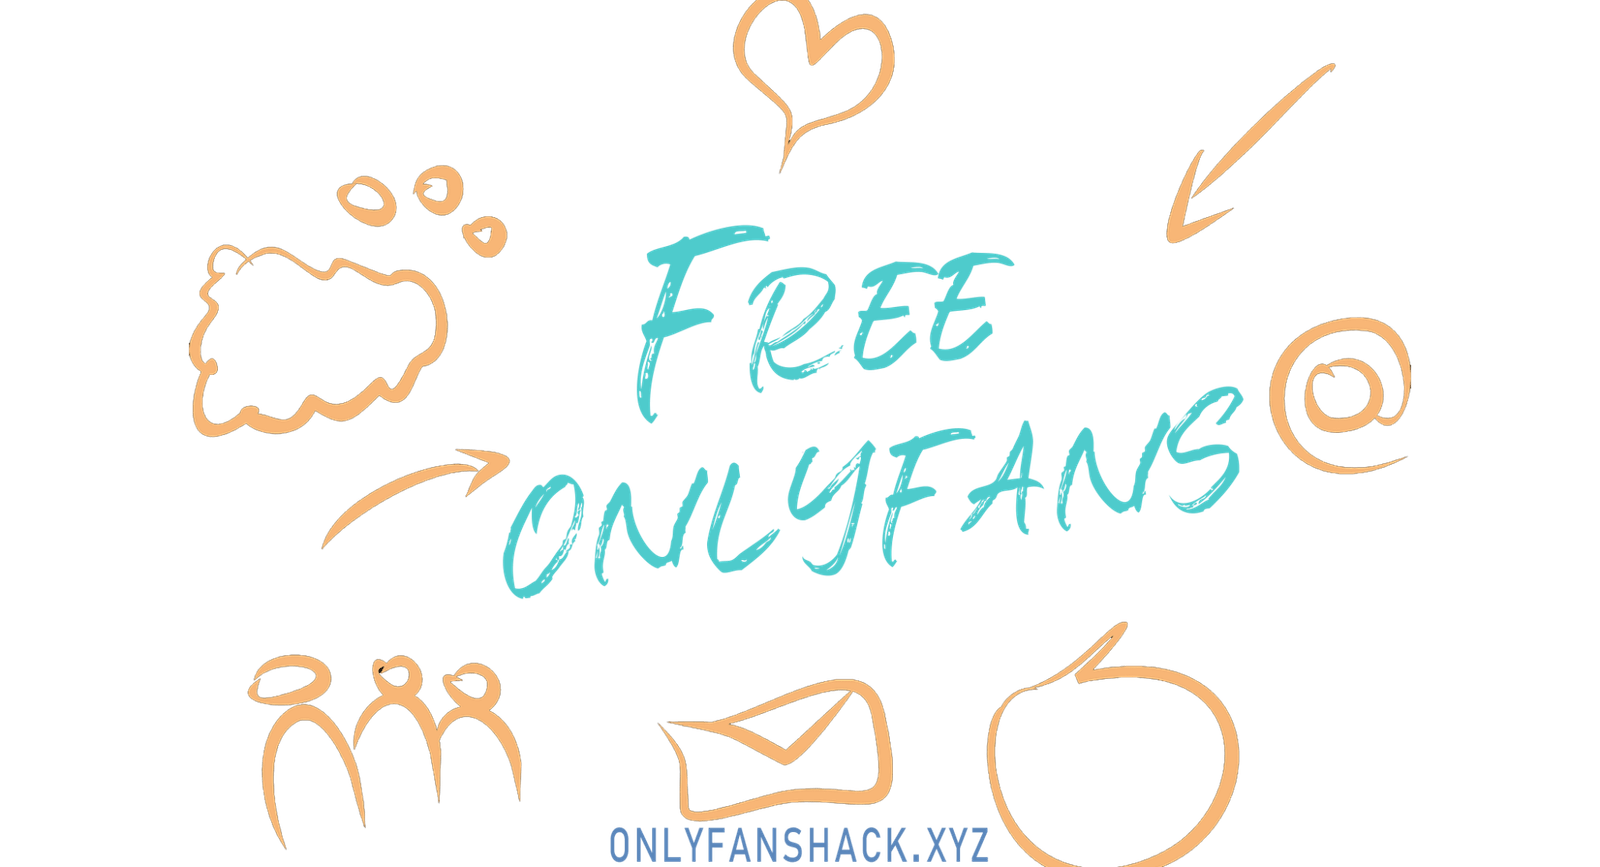 Free fans only pages